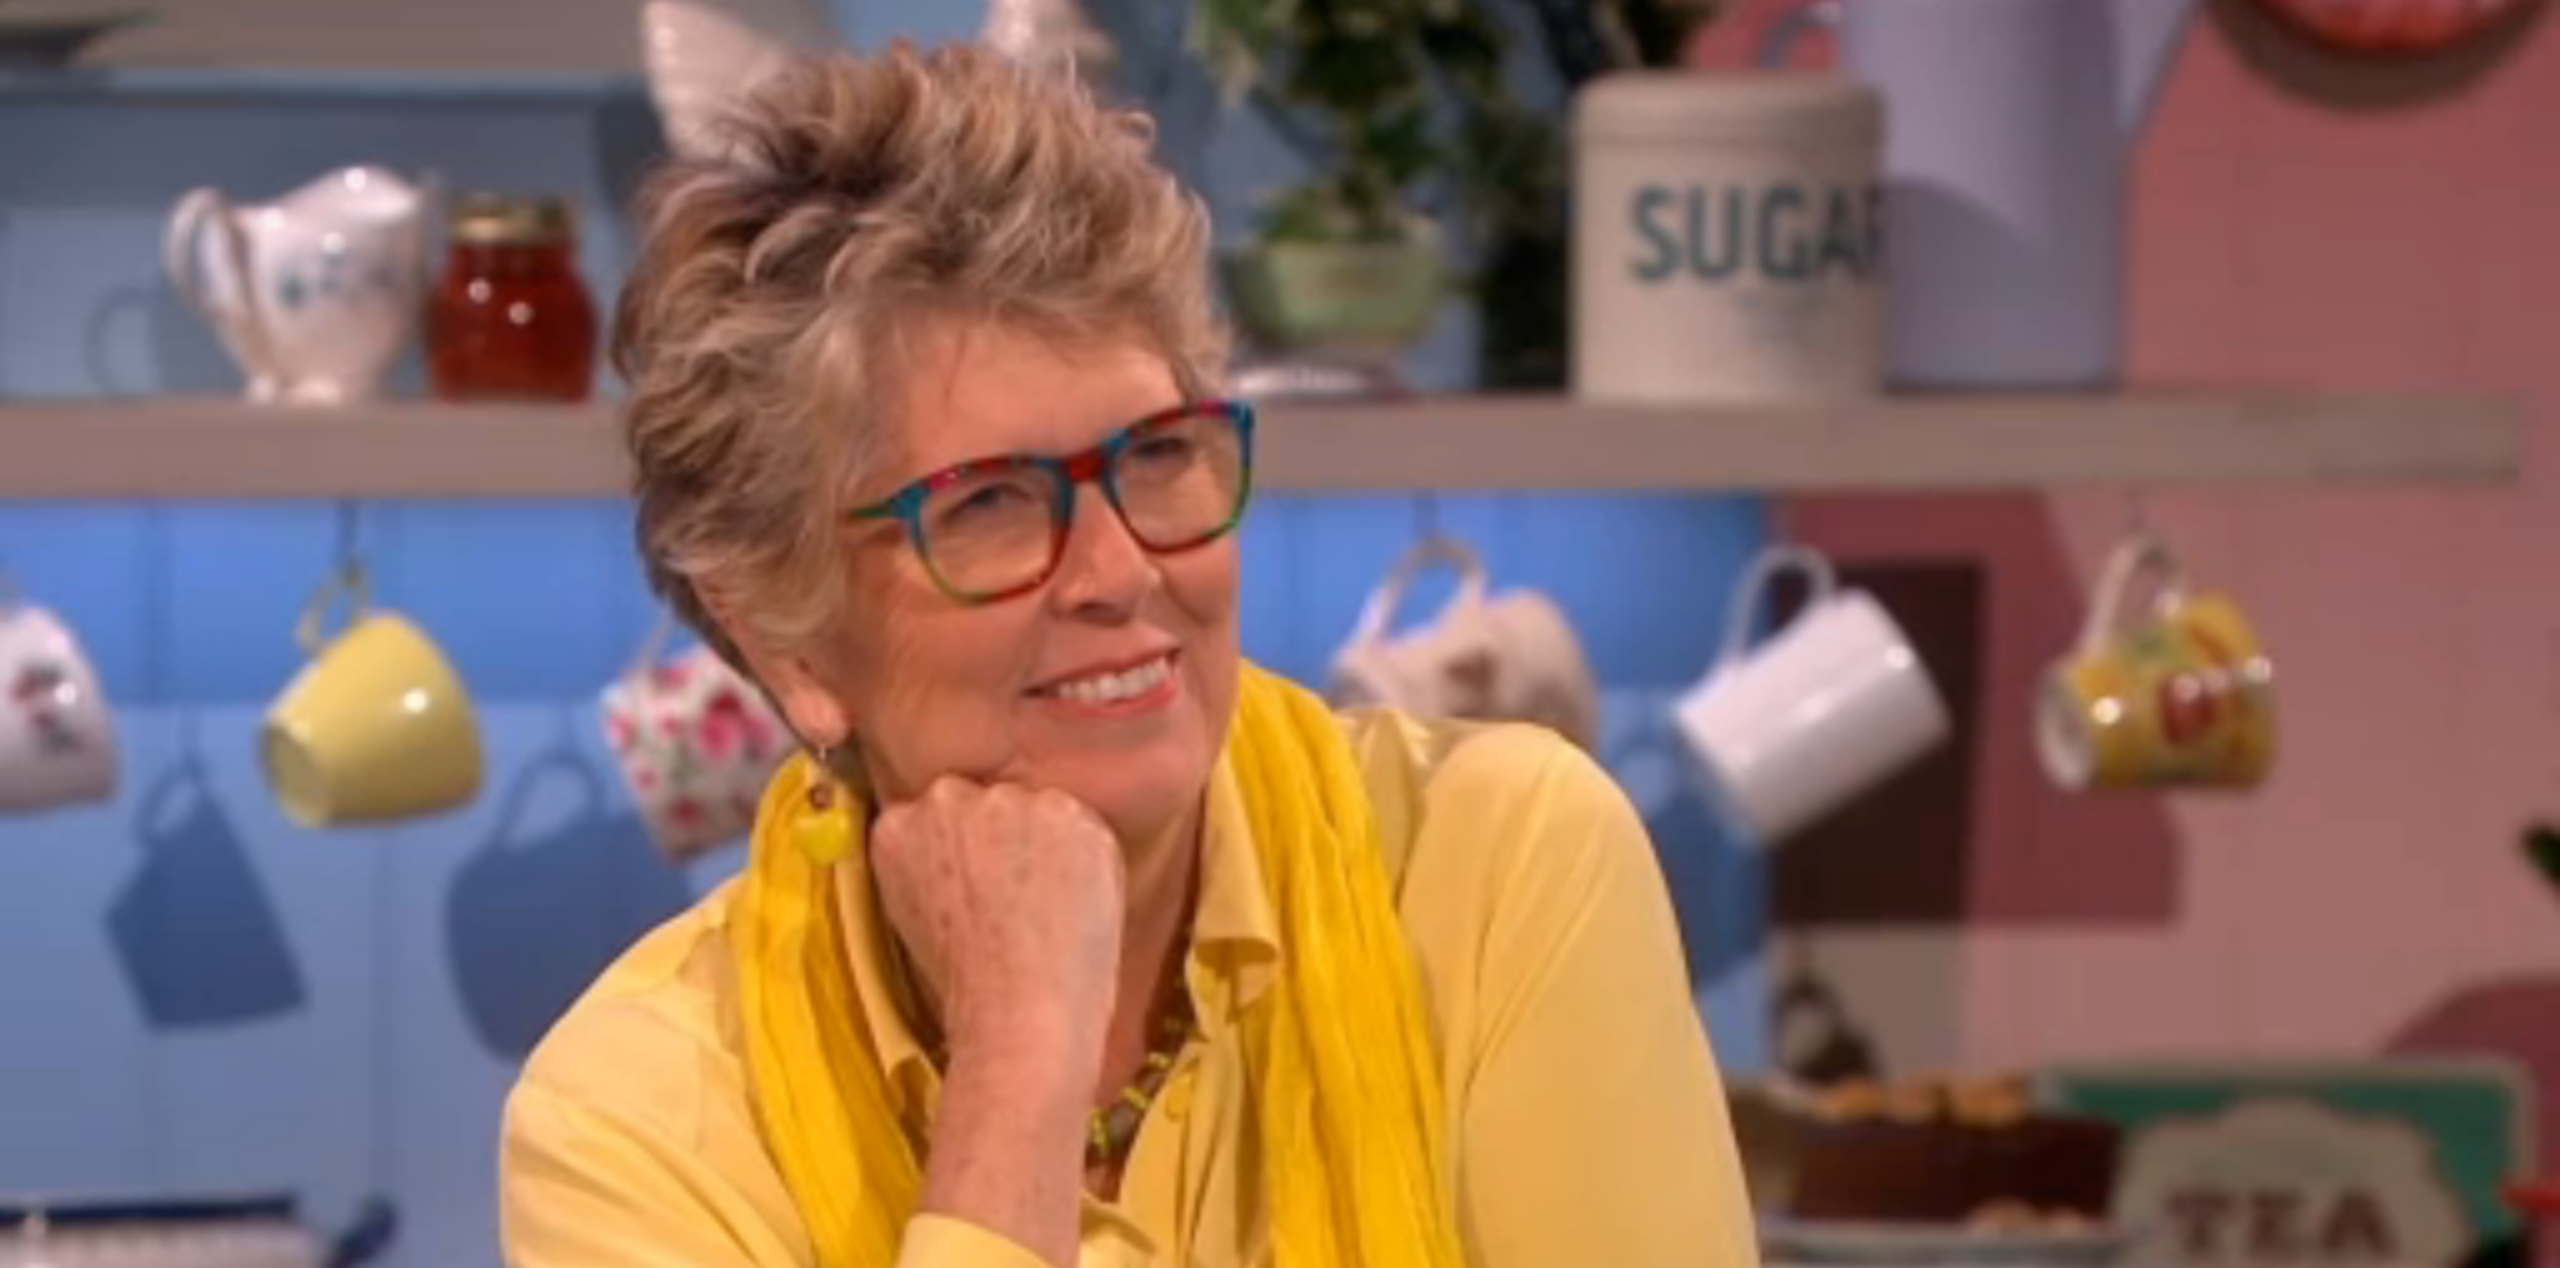 You'll where British Off's Prue Leith spends Christmas